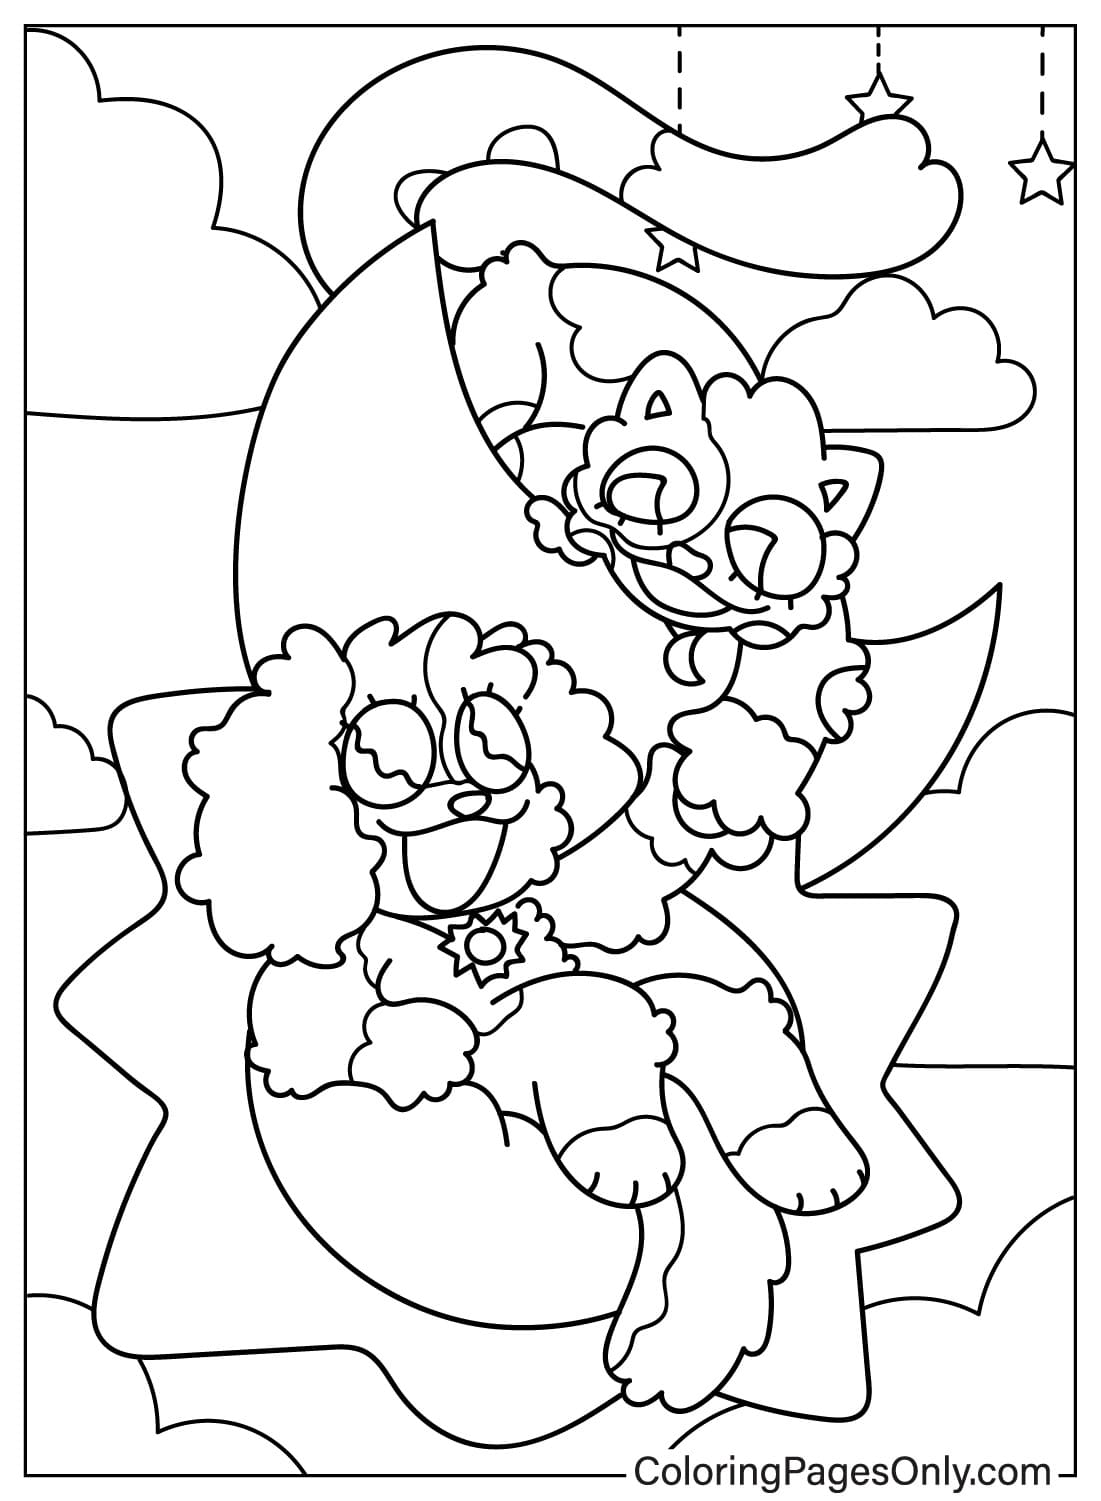 Drawing Catnap and DogDay Coloring Page from CatNap